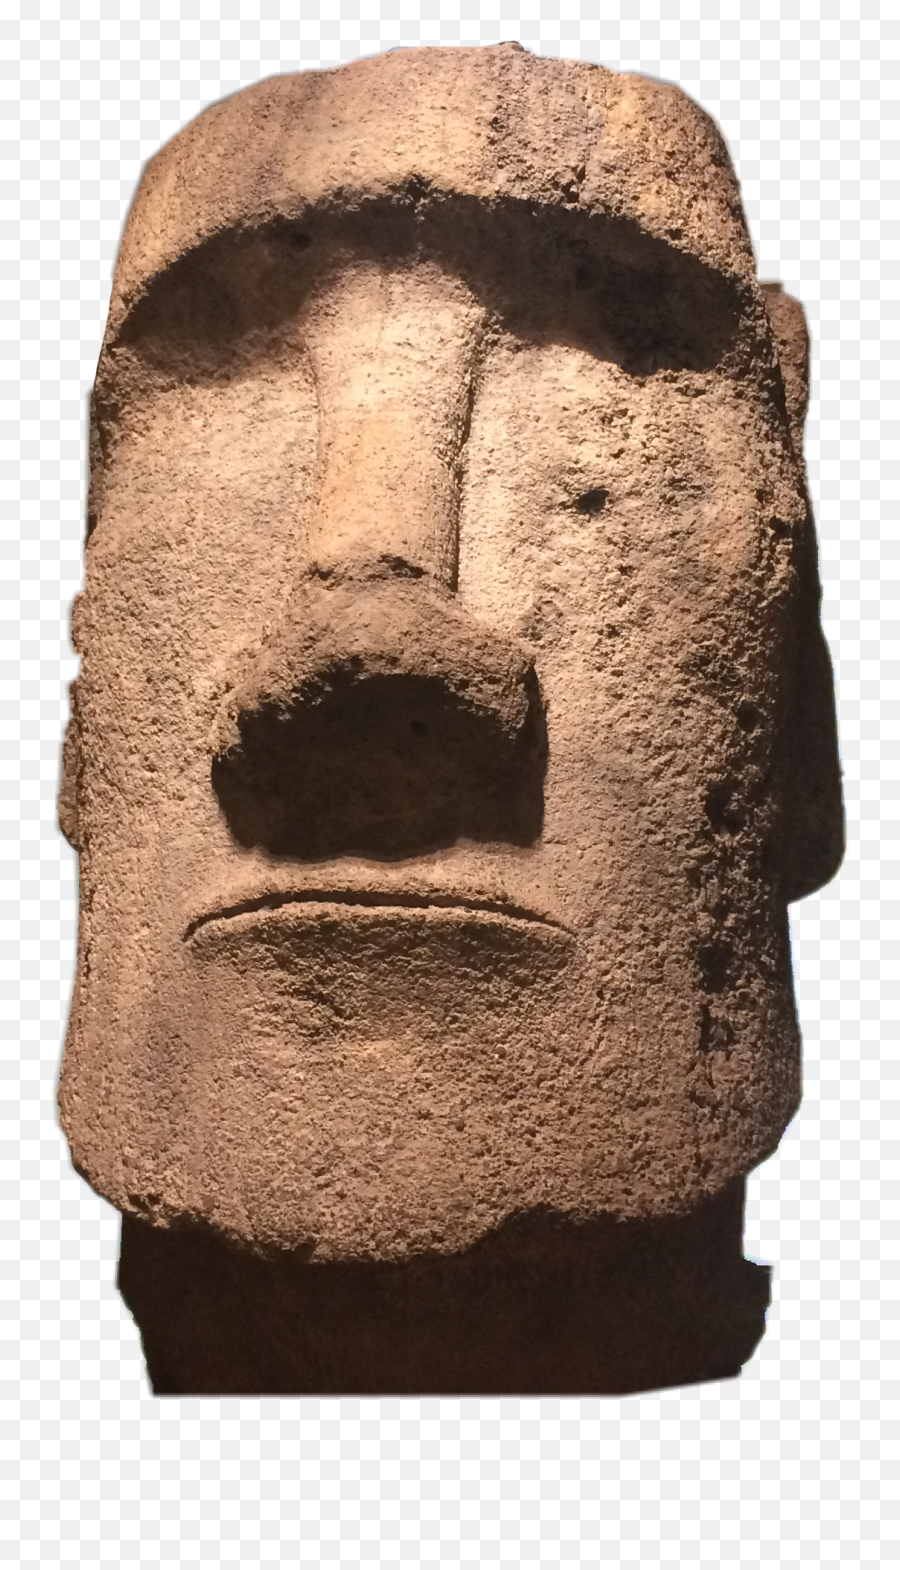 Largest Collection Of Free - Toedit Stickers On Picsart Emoji,Easter Island Statue Emoji